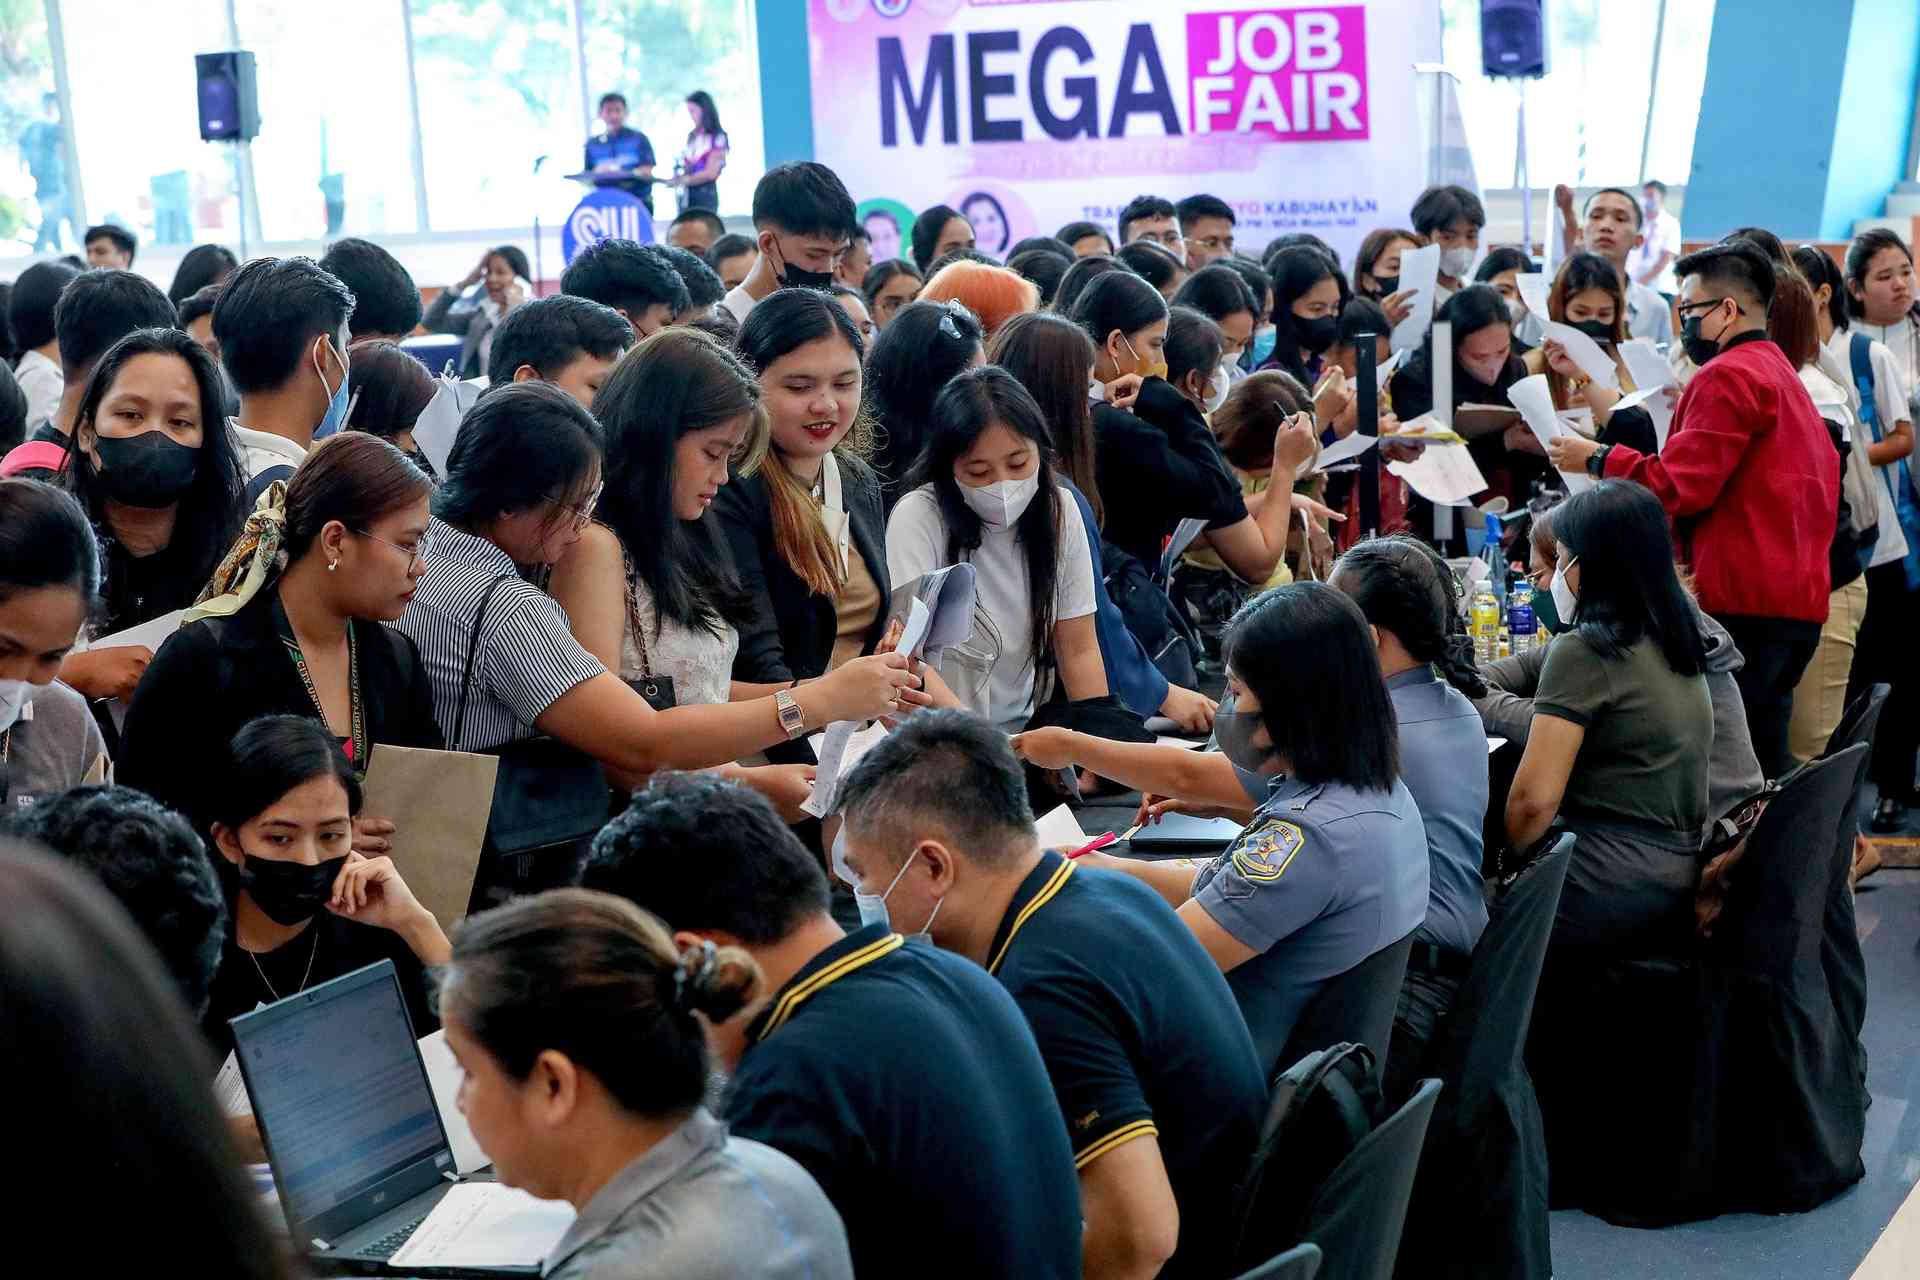 Pasay LGU offers 7,000 jobs on Labor Day